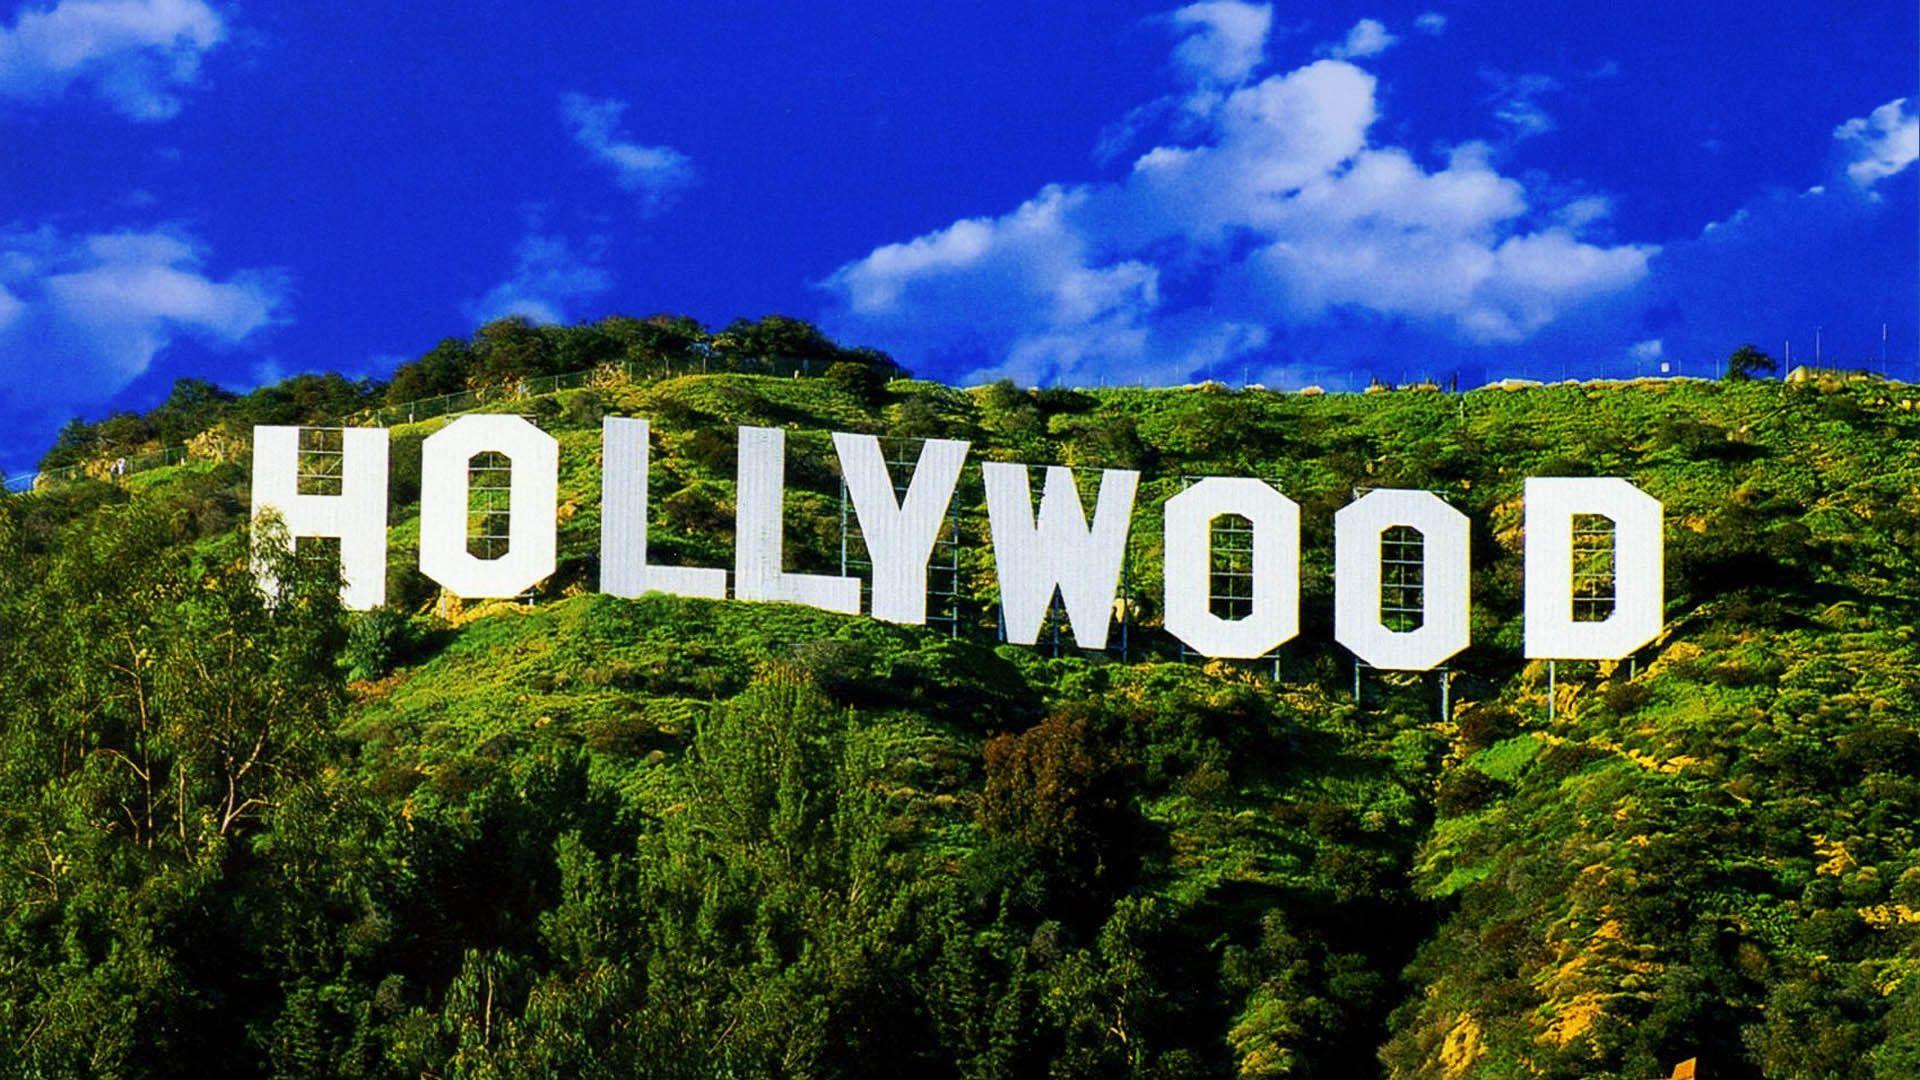 Hollywood Wallpaper HD, image collections of wallpaper